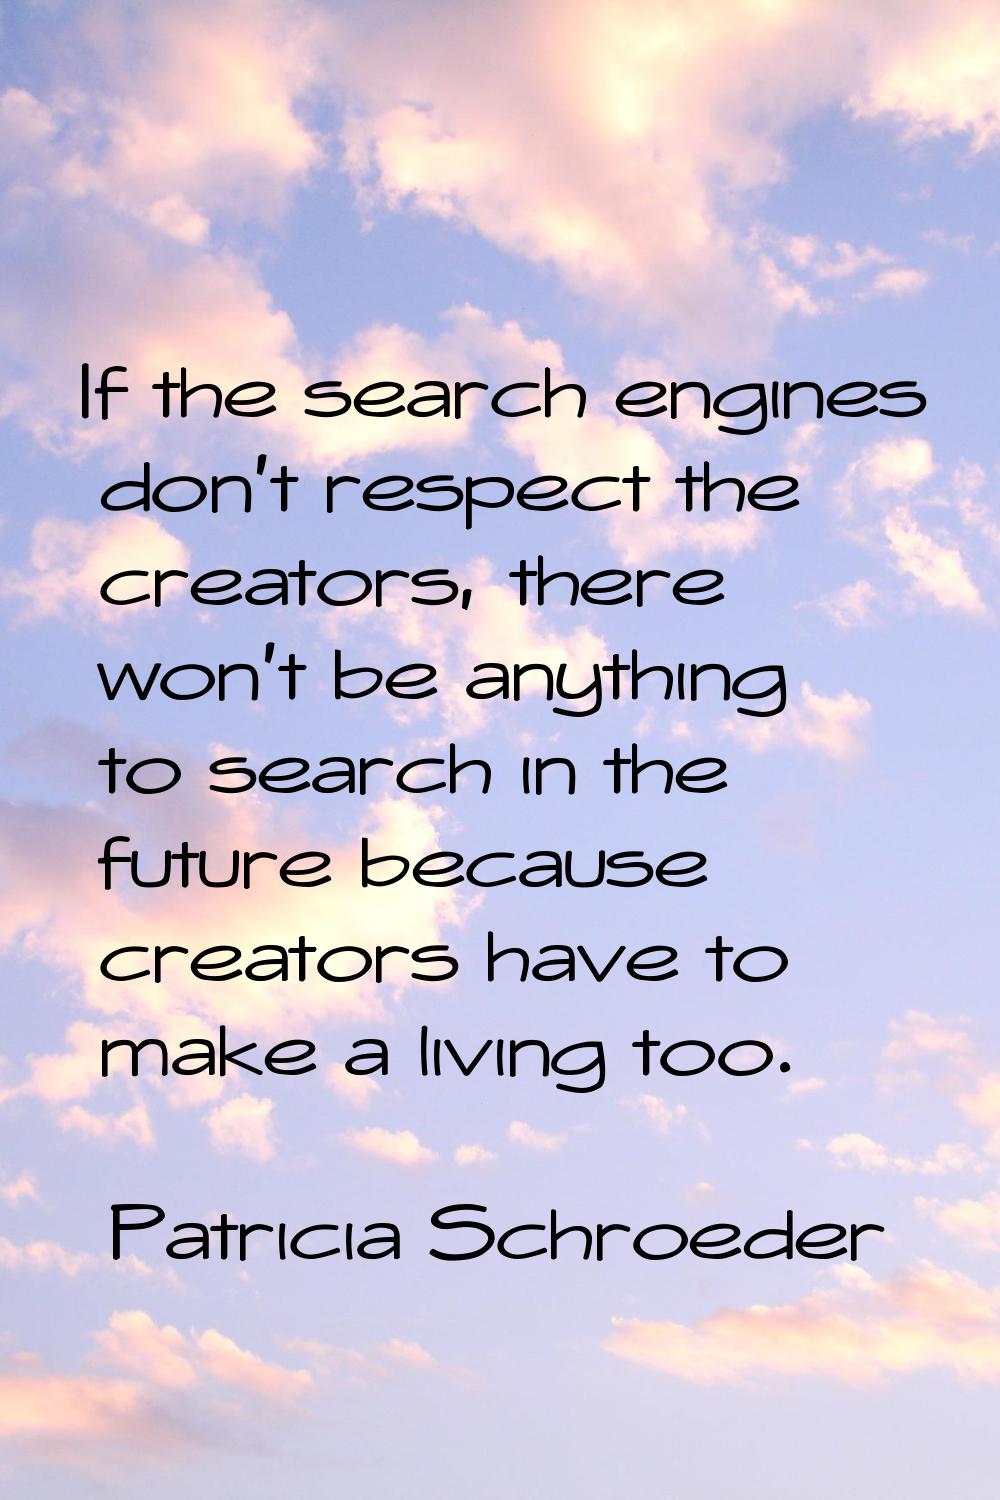 If the search engines don't respect the creators, there won't be anything to search in the future b